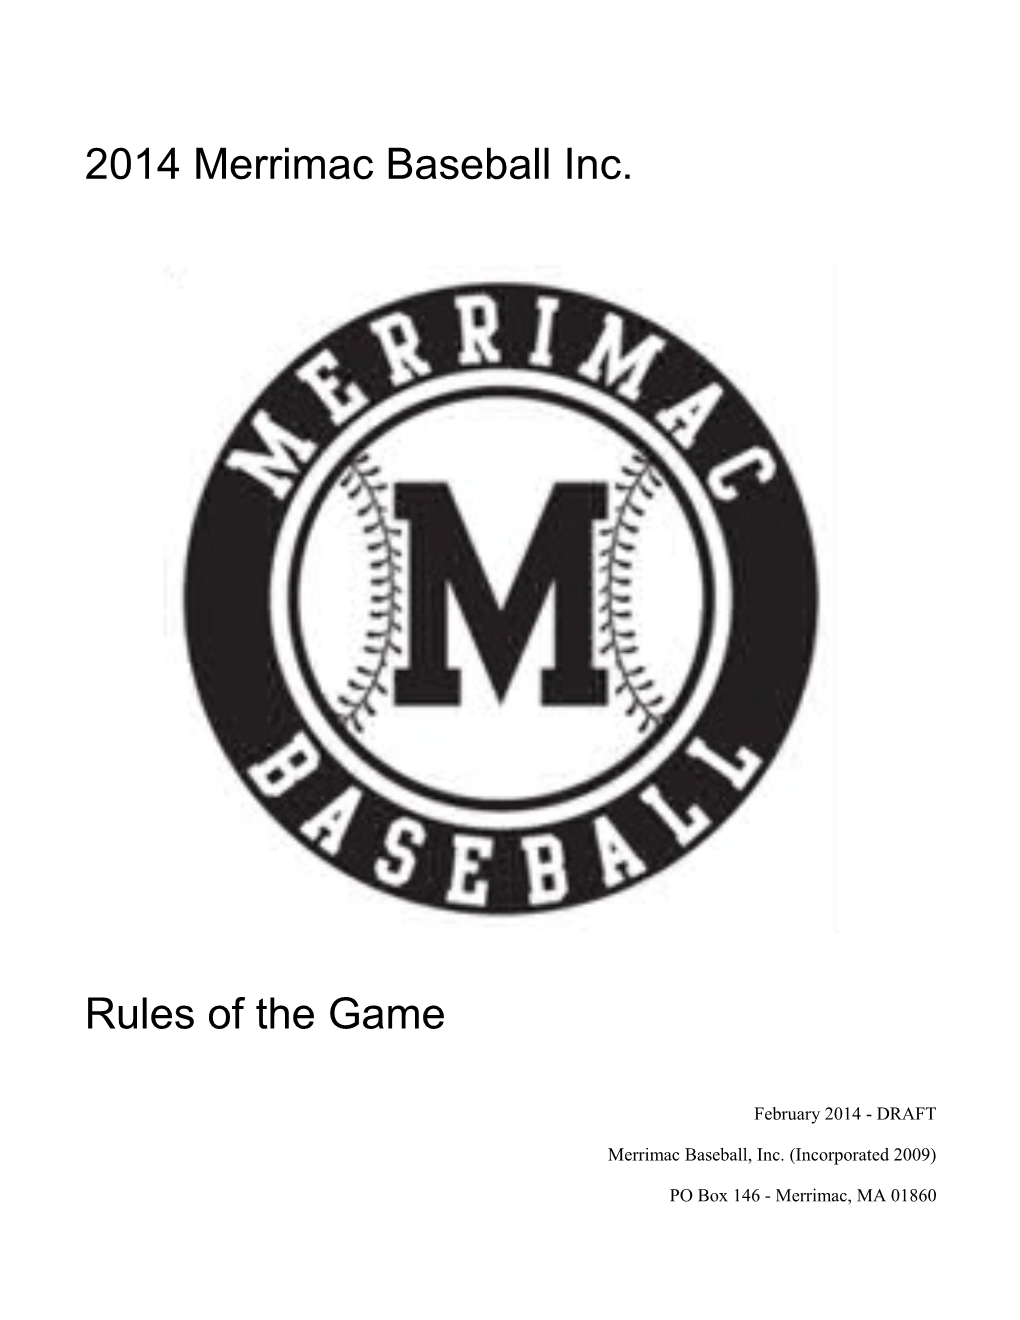 1) Updated Rules by Division with Pitch Rule Changes Have Received Two Divisions Please